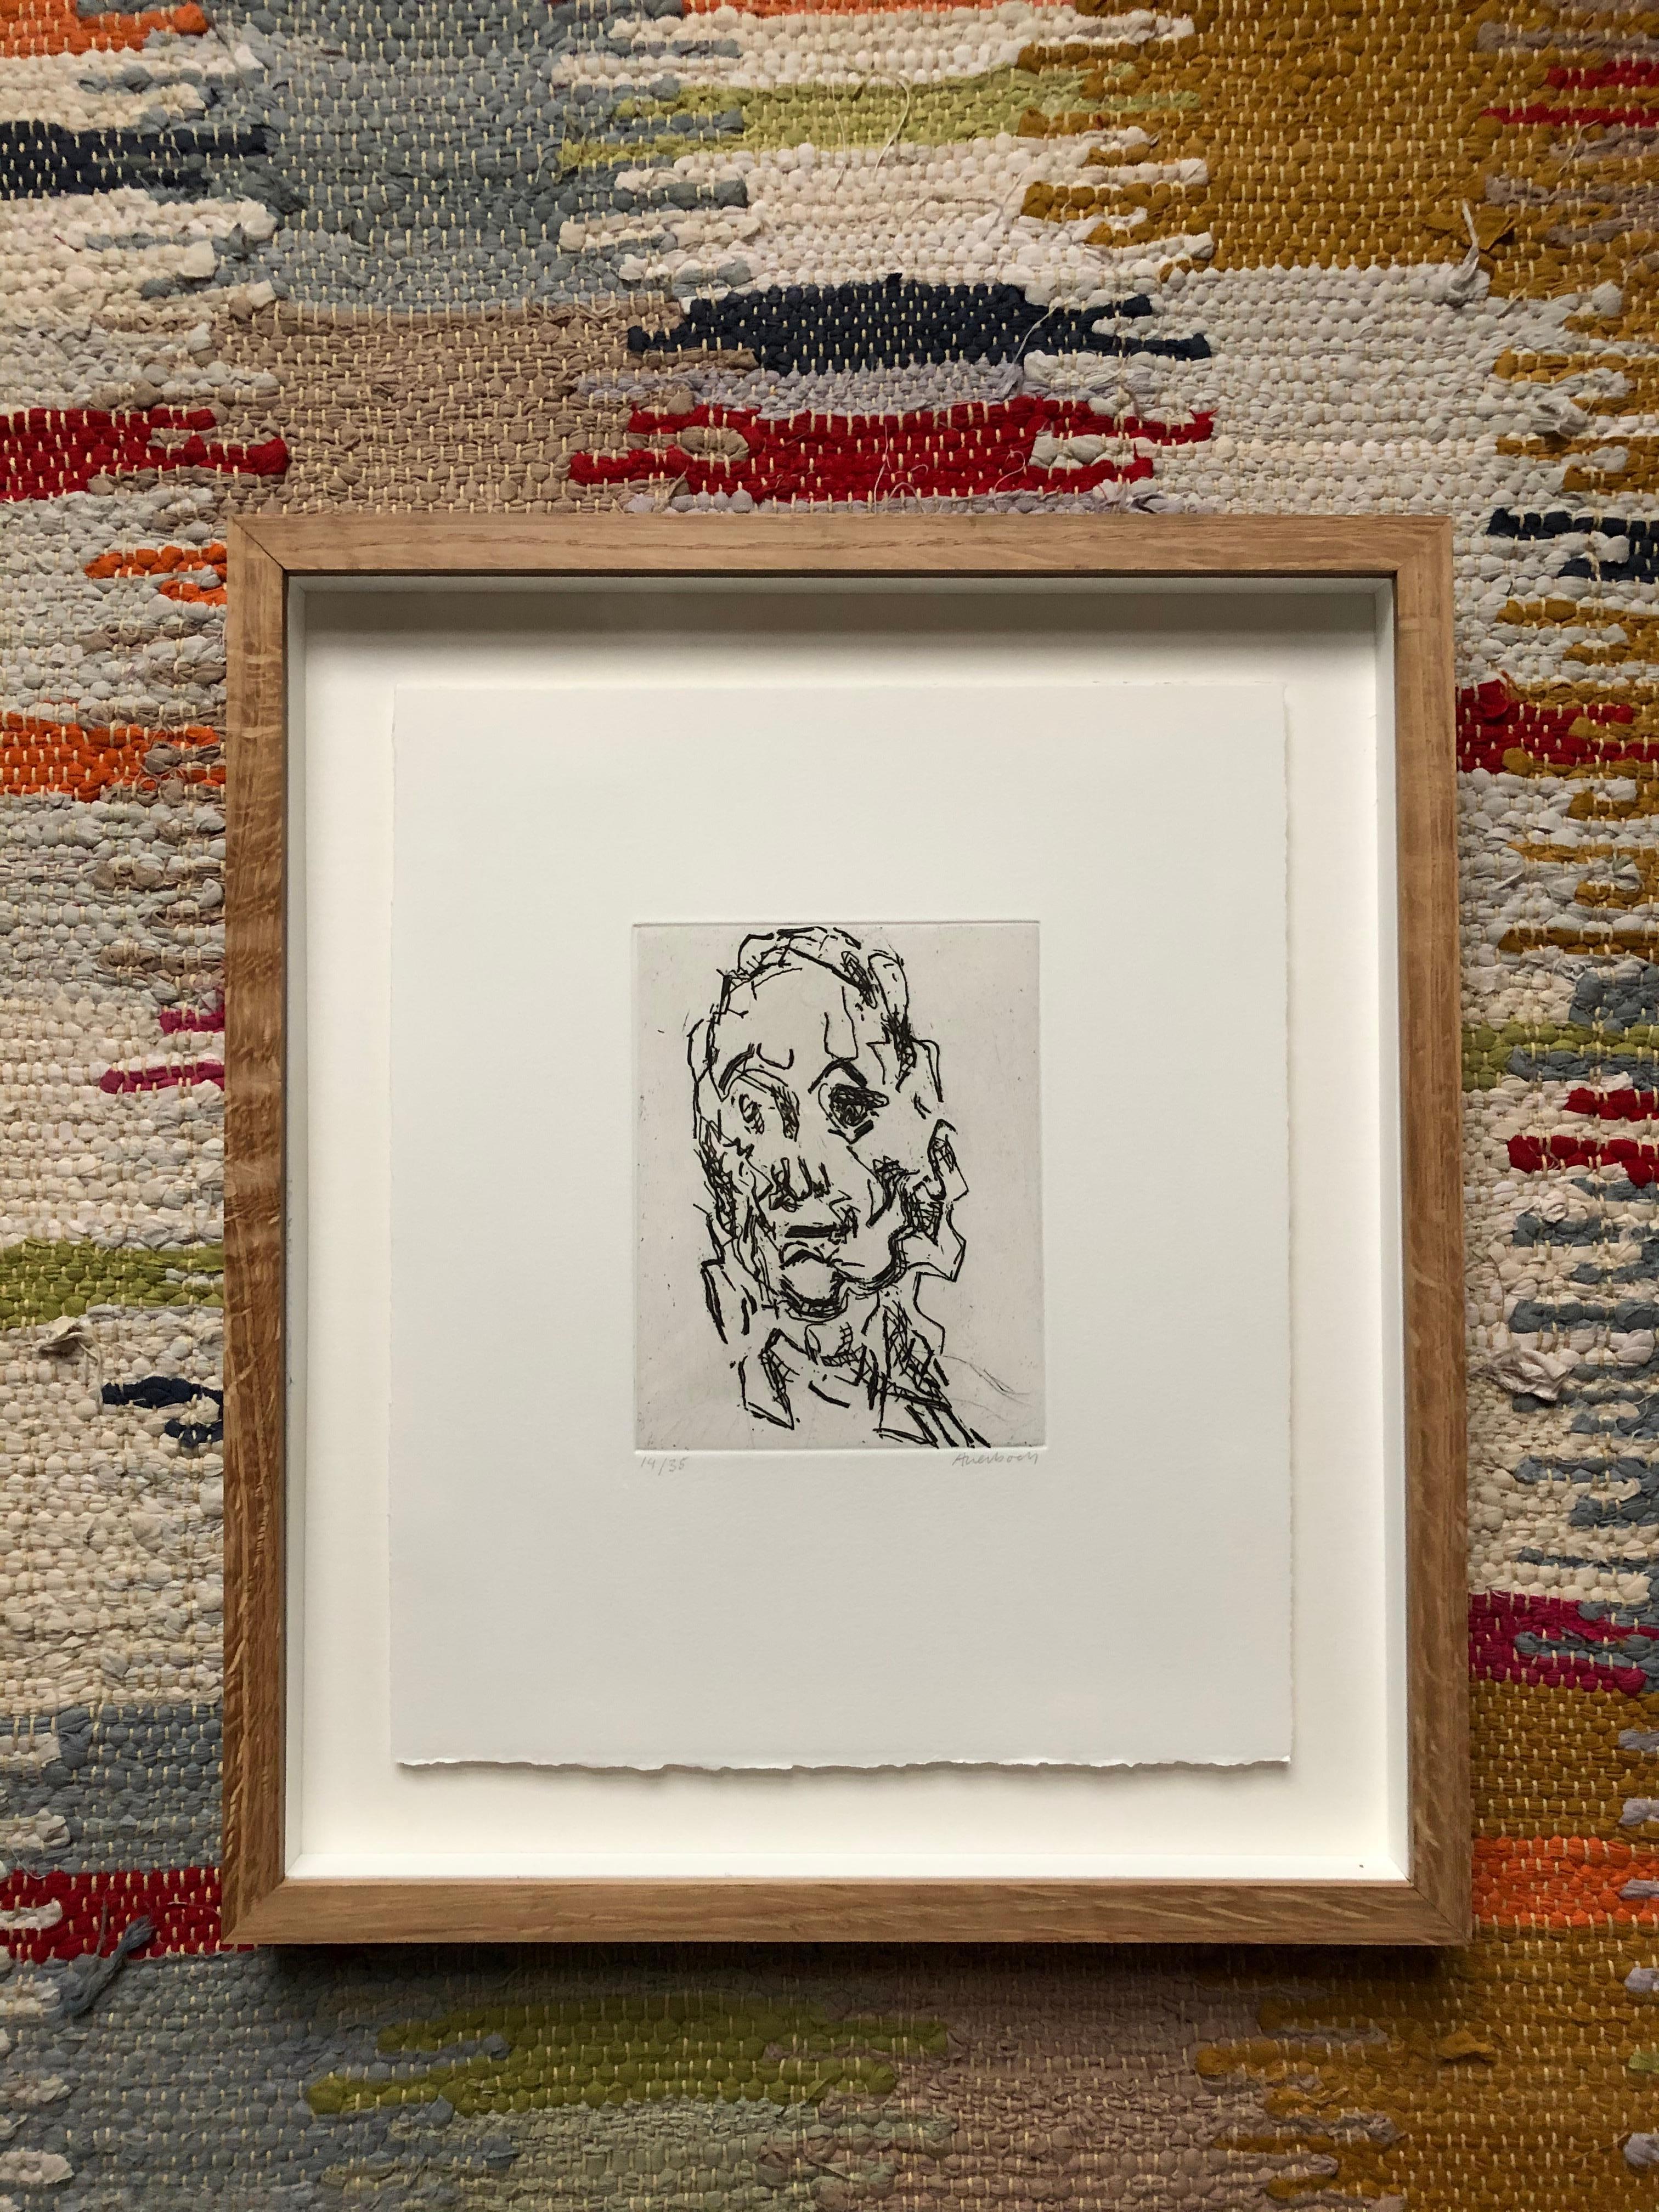 FRANK AUERBACH
Ruth, 2001-2

Etching printed with tone, on Somerset white paper
Signed and numbered from the edition of 35
Printed by Mark Balakjian and Dorothea Wight at Studio Prints, London
Published by Marlborough Graphics, London
Plate: 14.6 x